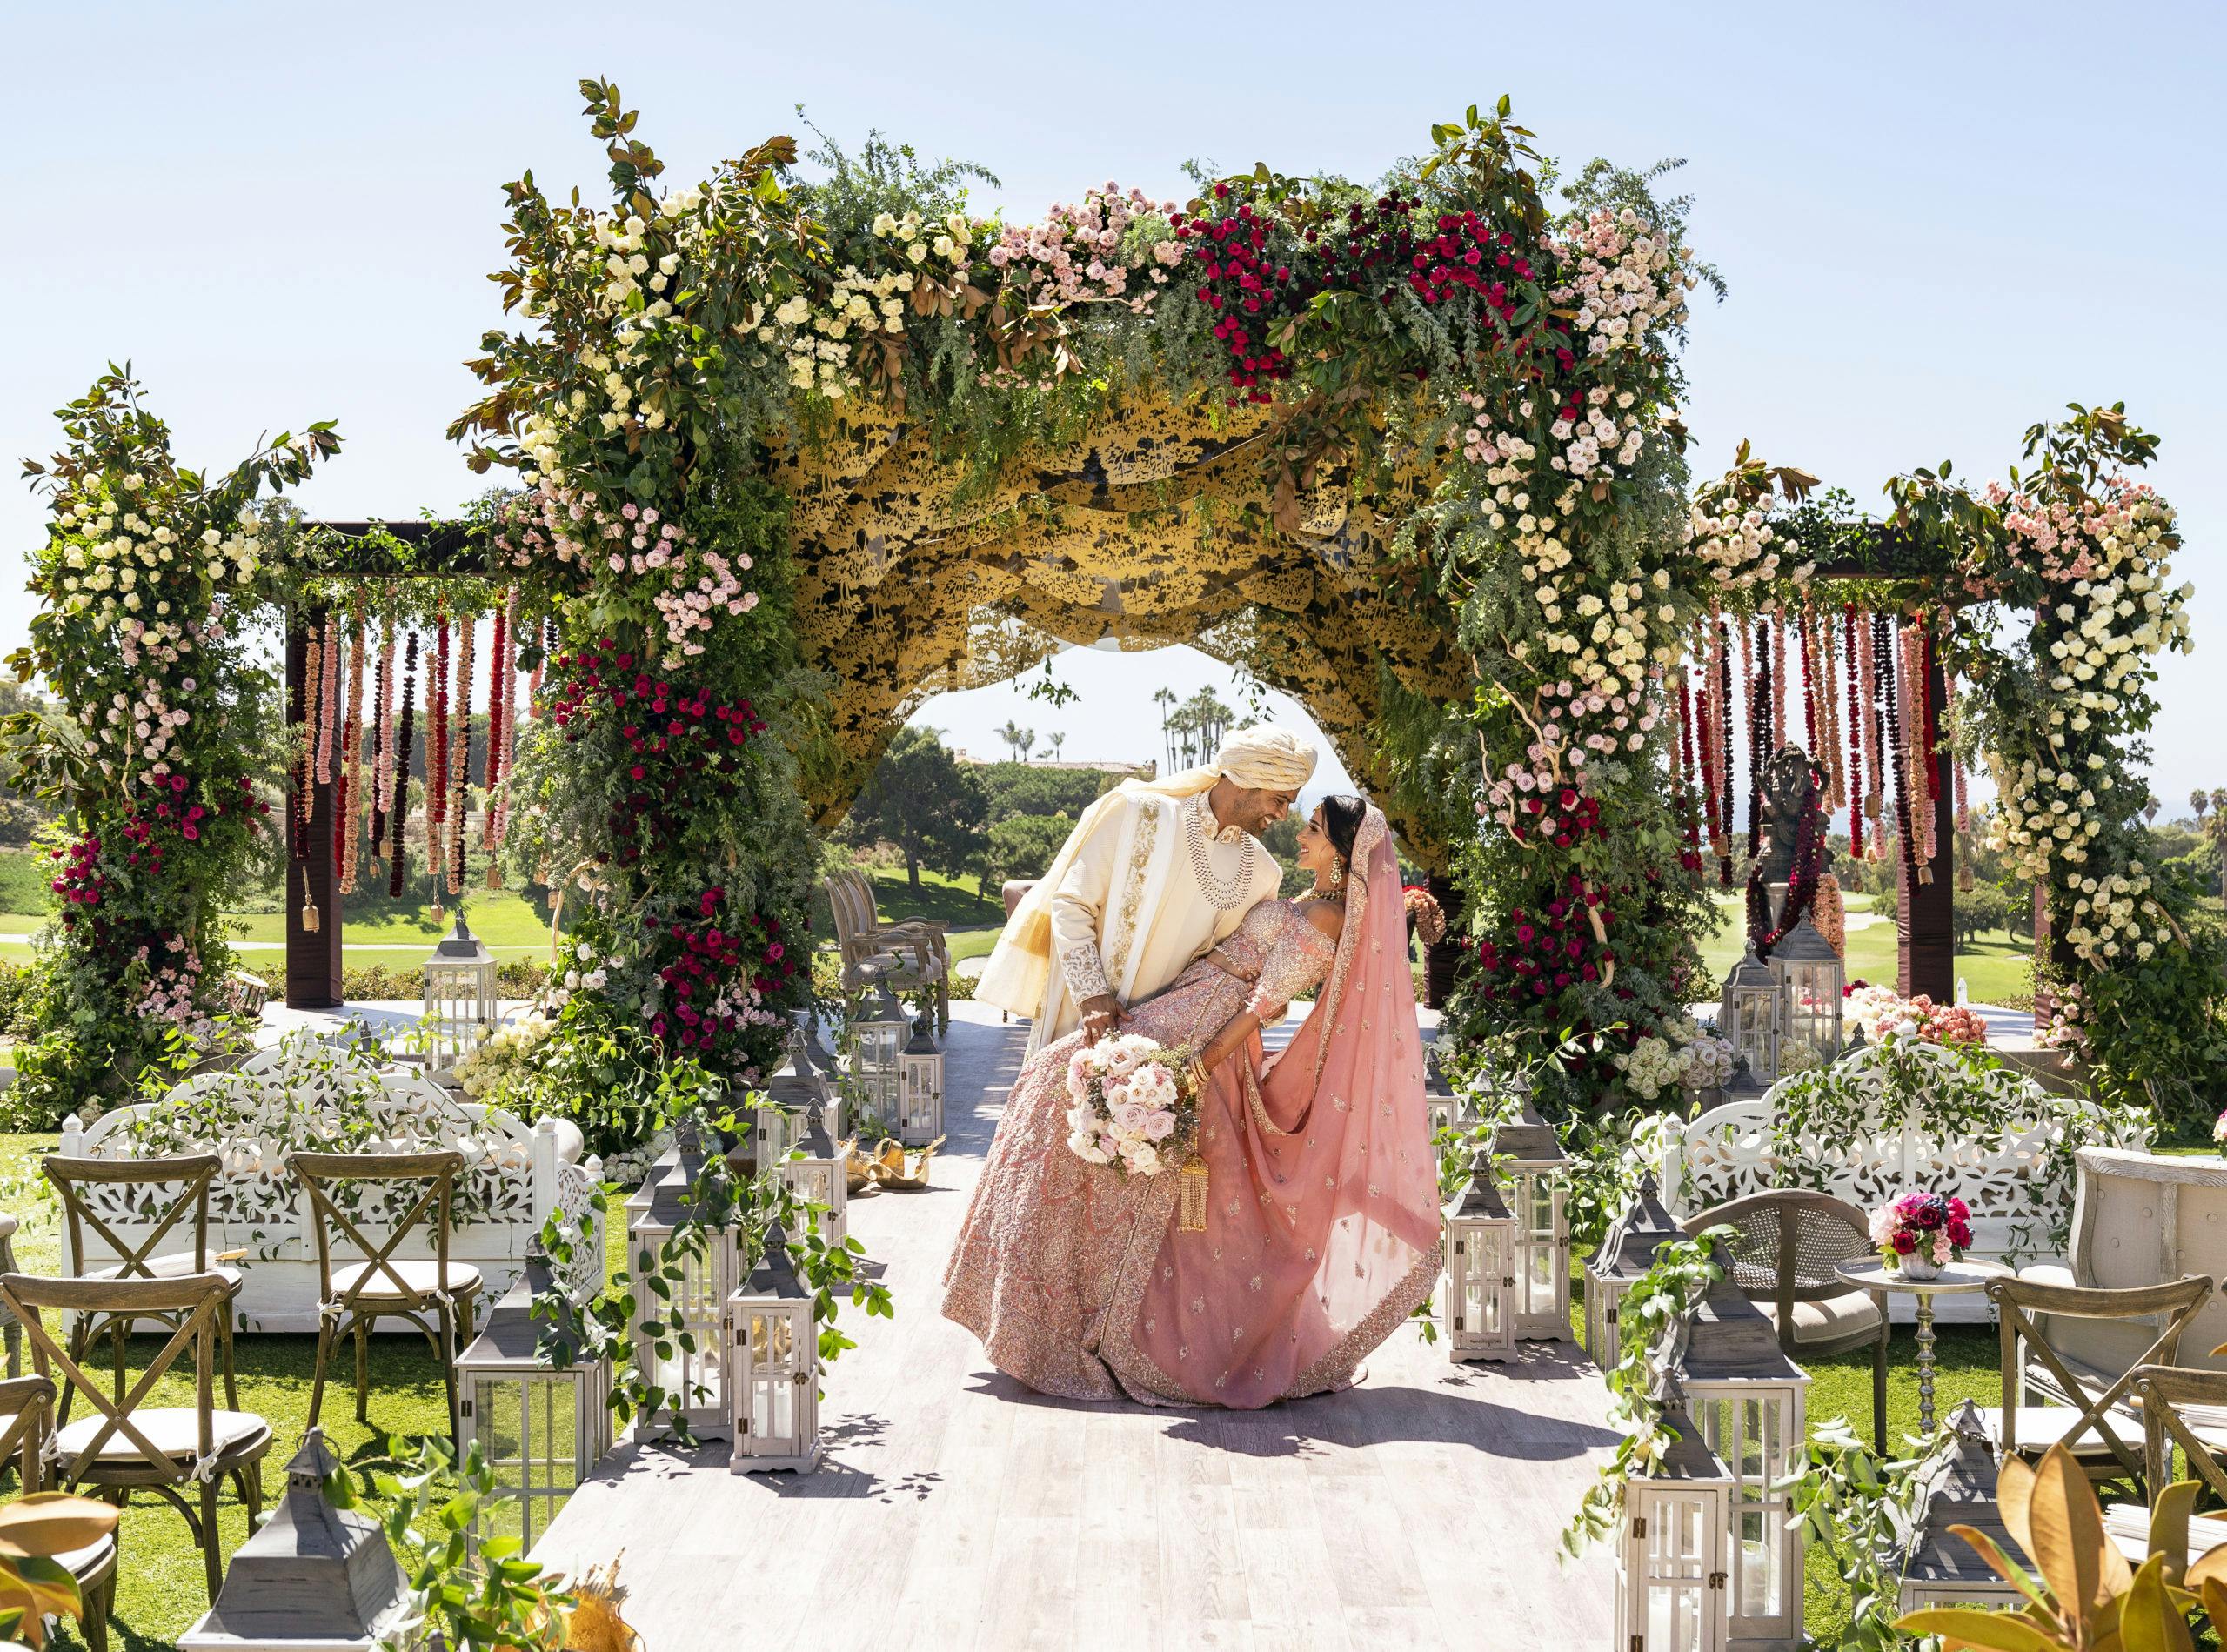 Groom dipping bride at traditional Indian wedding with colorful florals and greenery backdrop | PartySlate